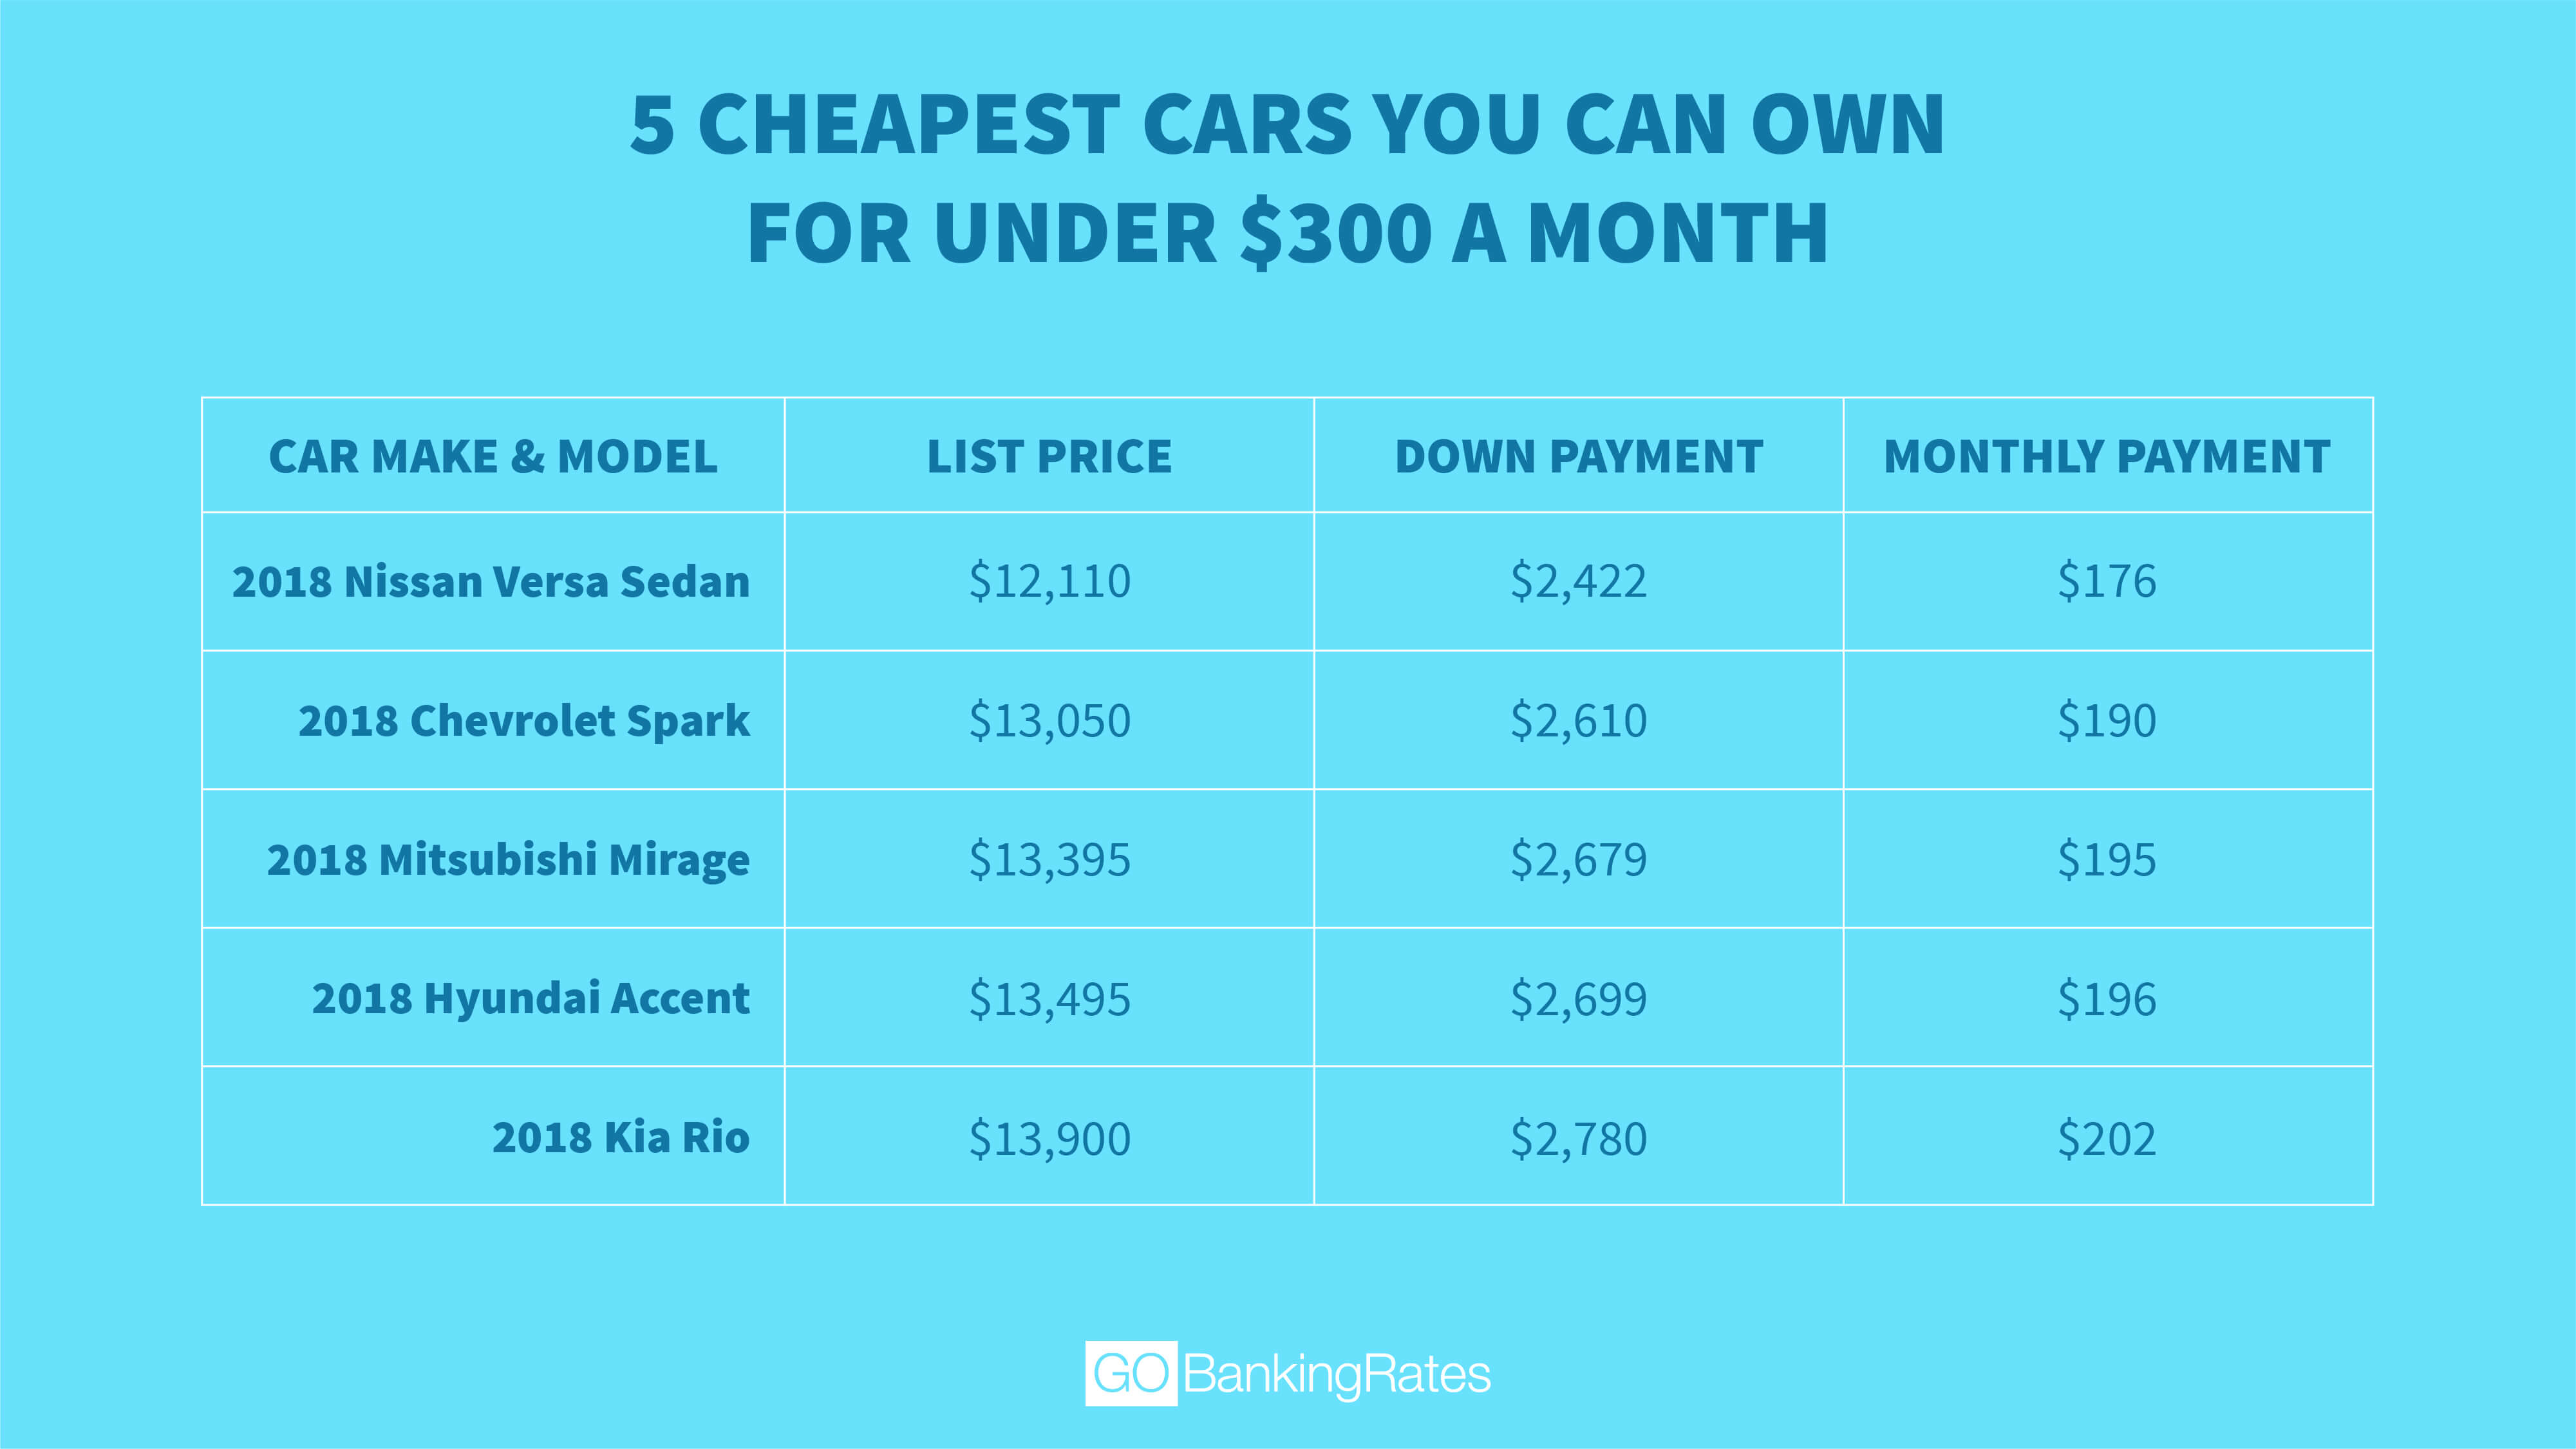 37 Cars You Can Own for Under $300 a Month – GOBanking